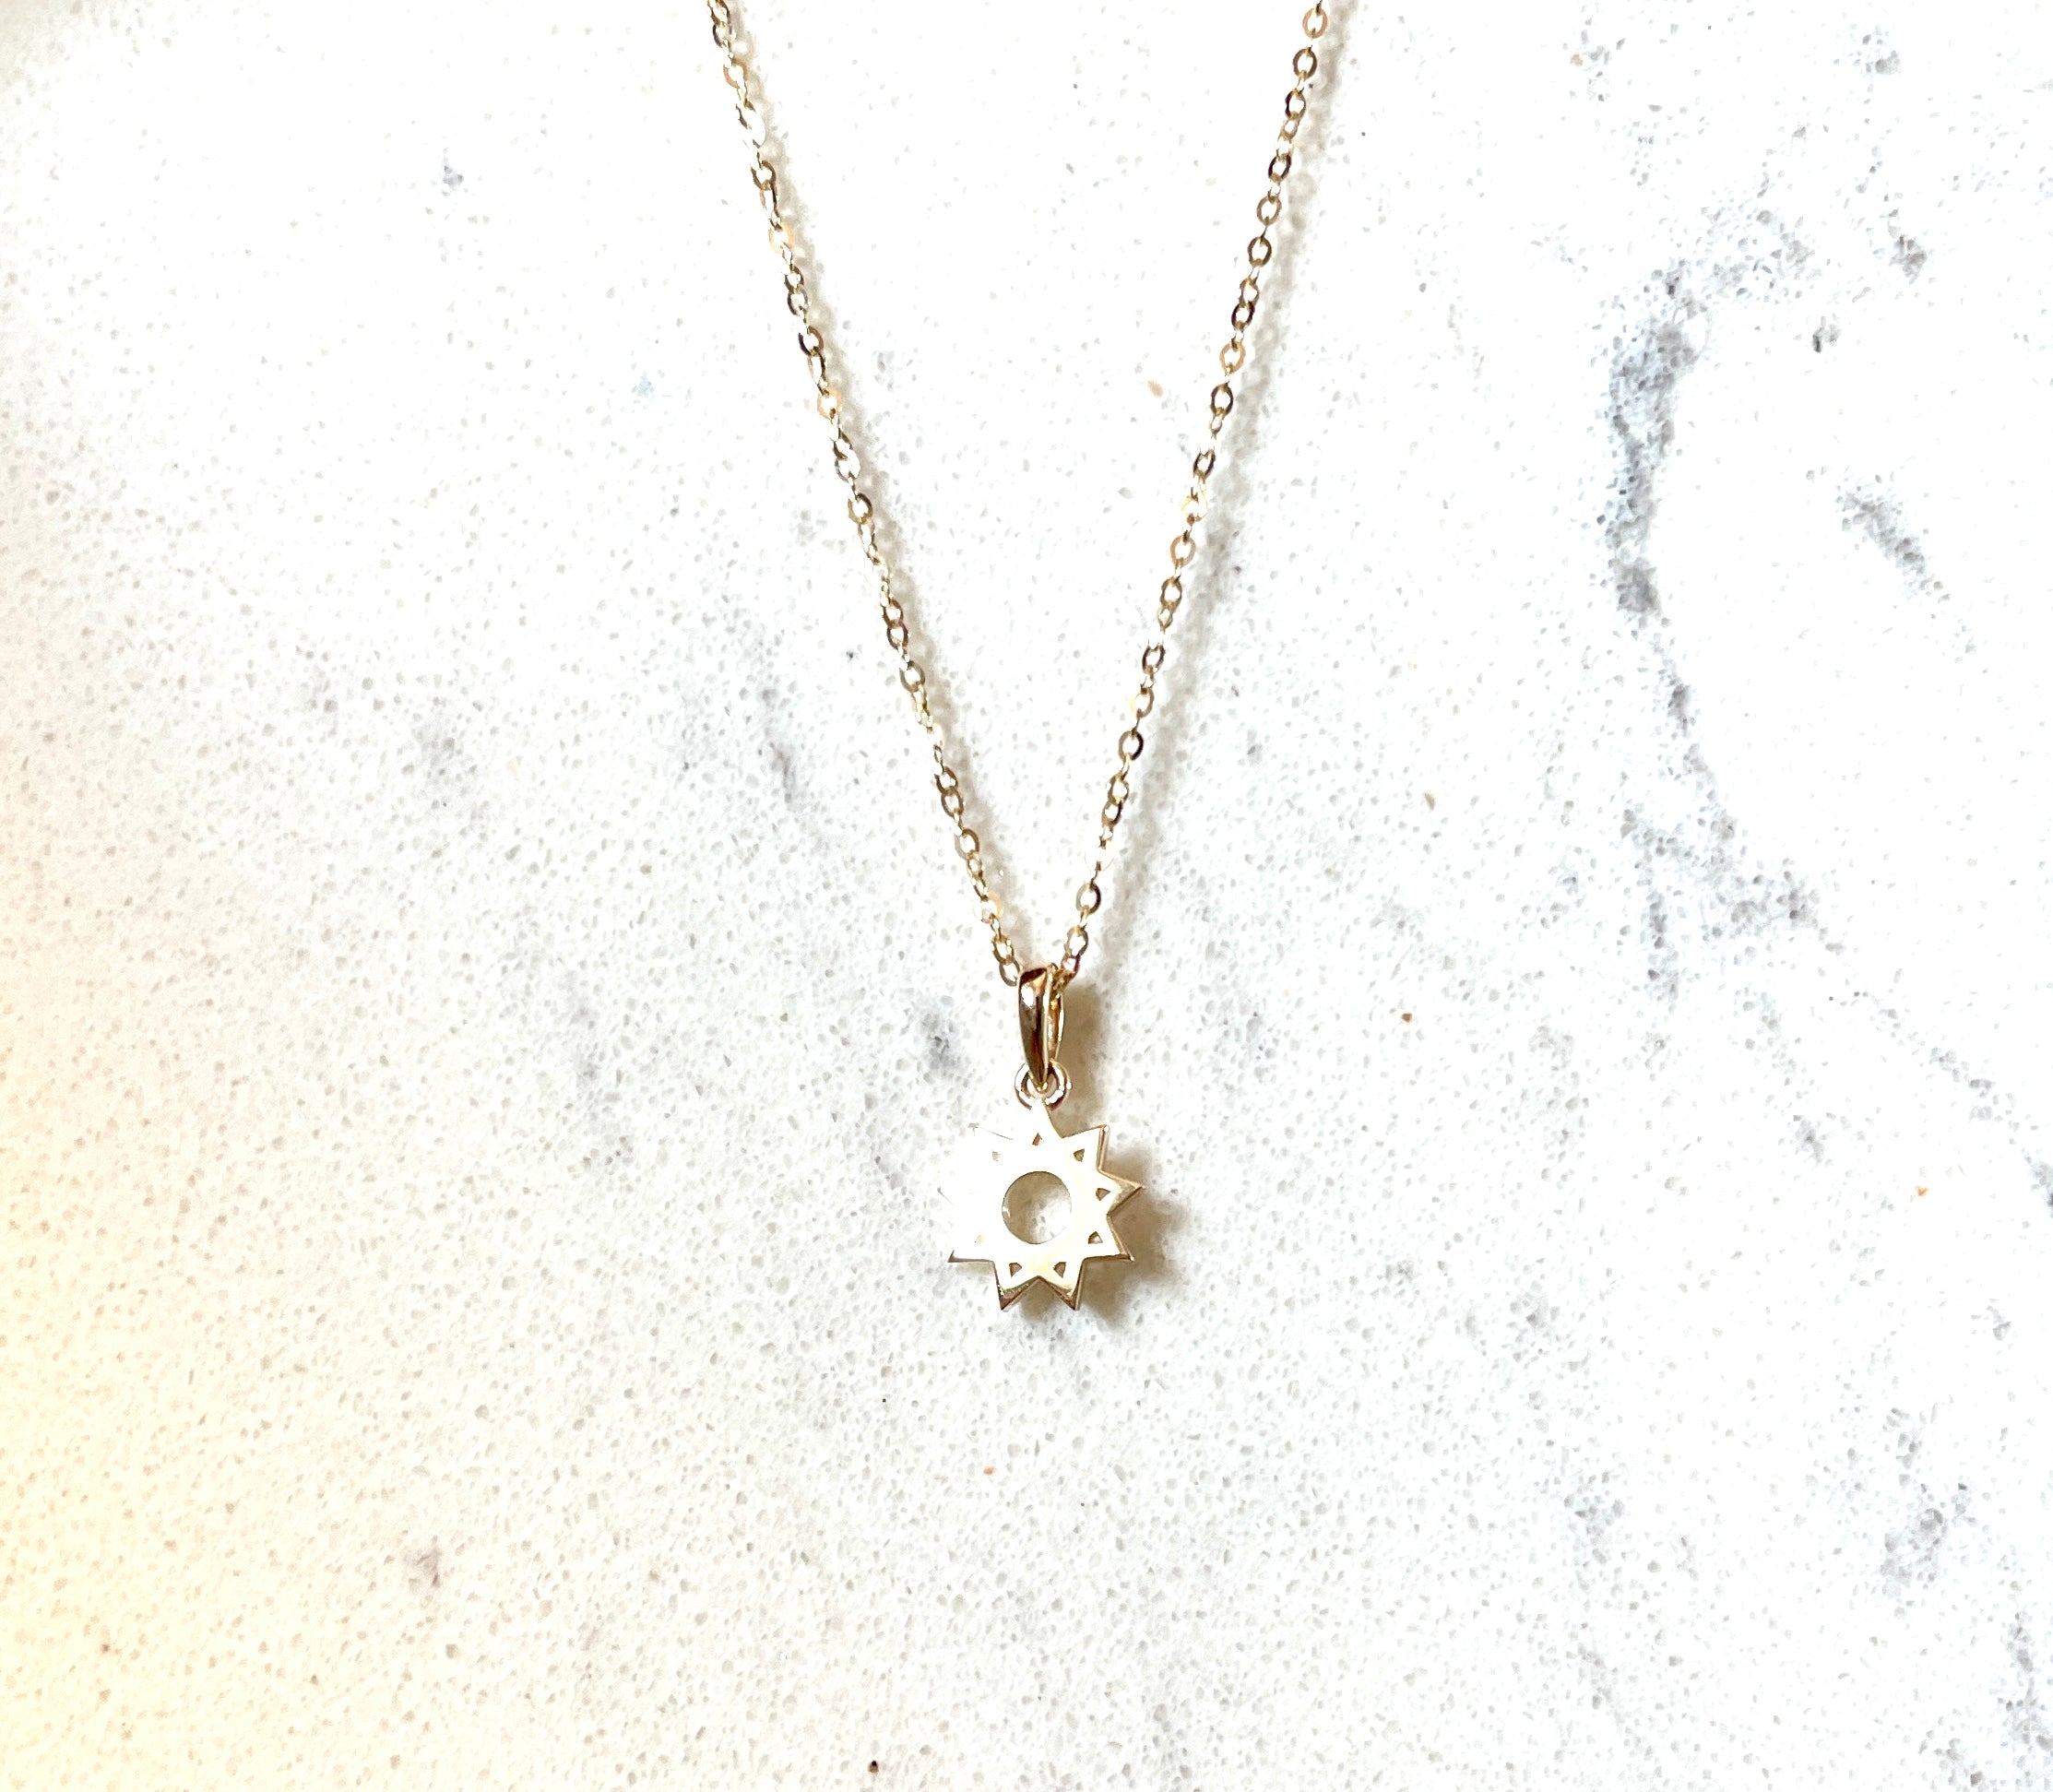 simple nine pointed Bahai star pendant on 14k yellow gold necklace